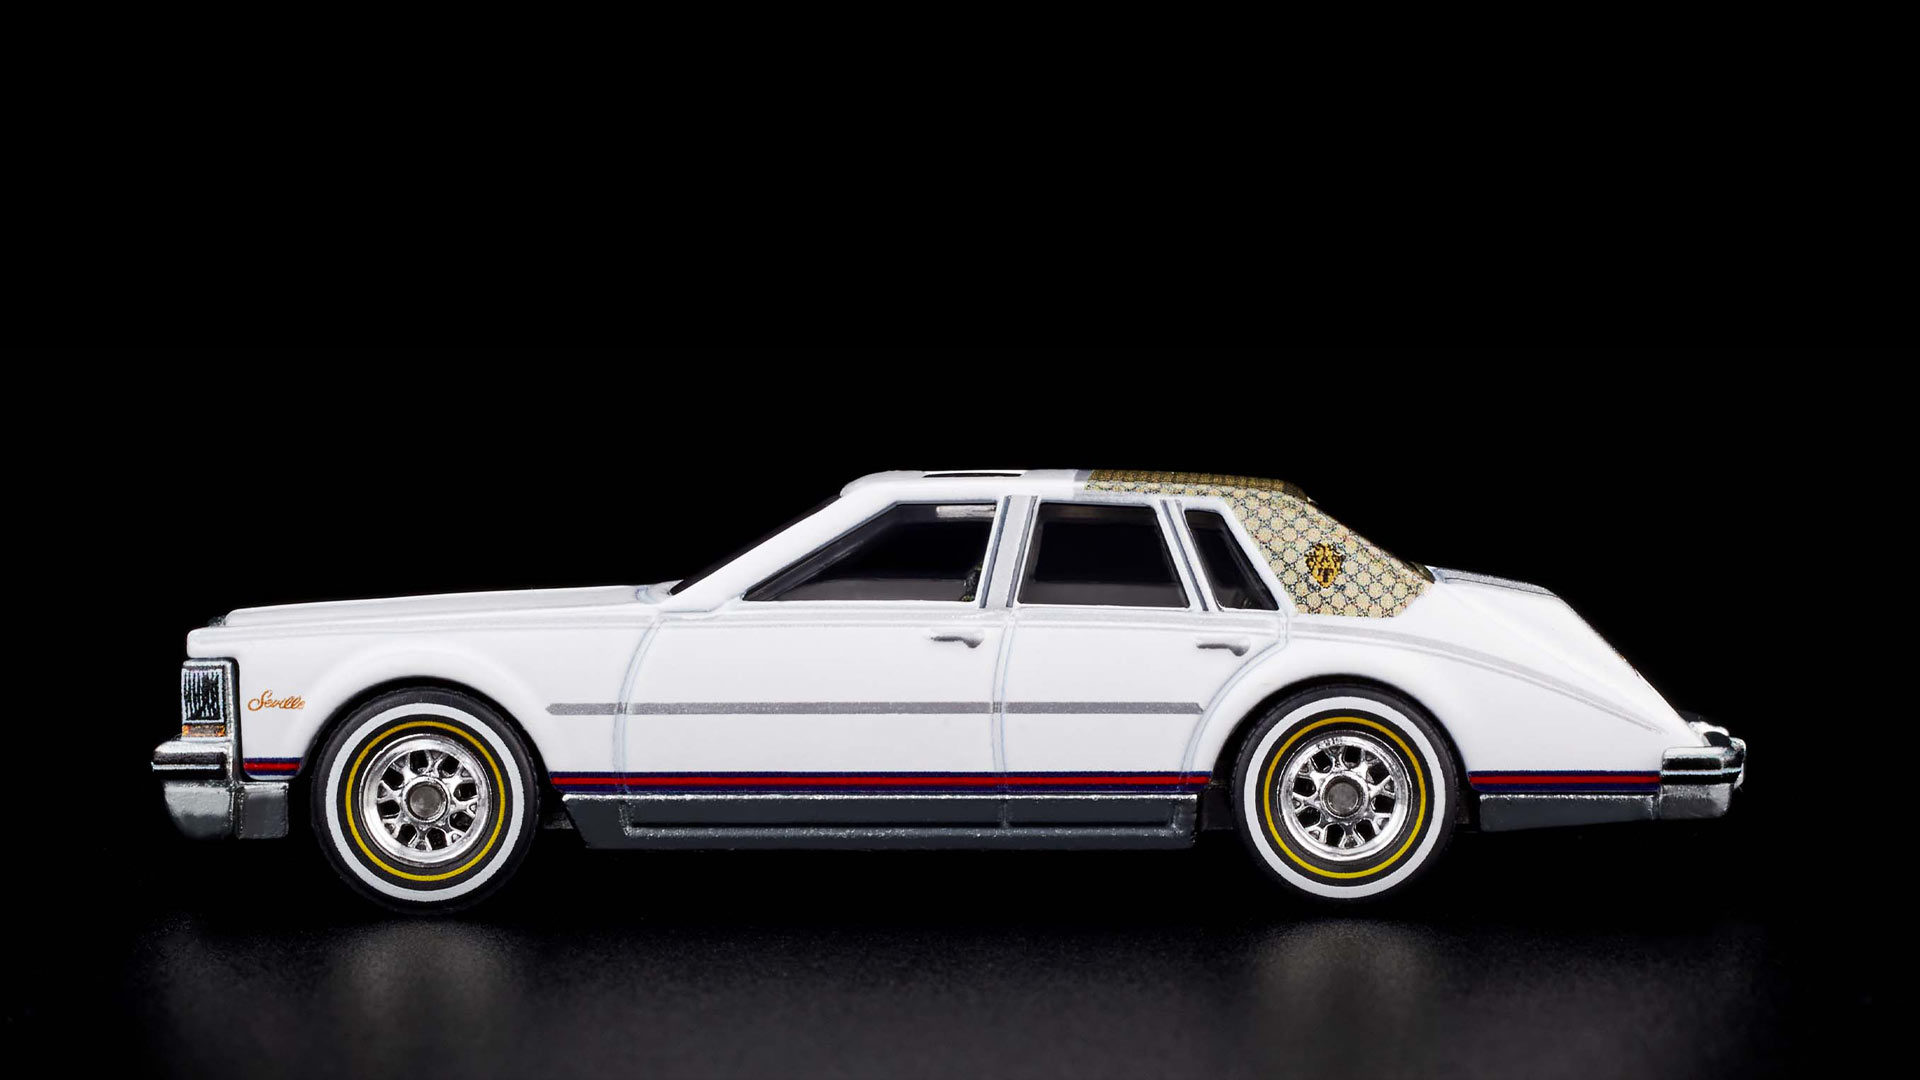 Hot Wheels and Gucci make a special Cadillac Seville